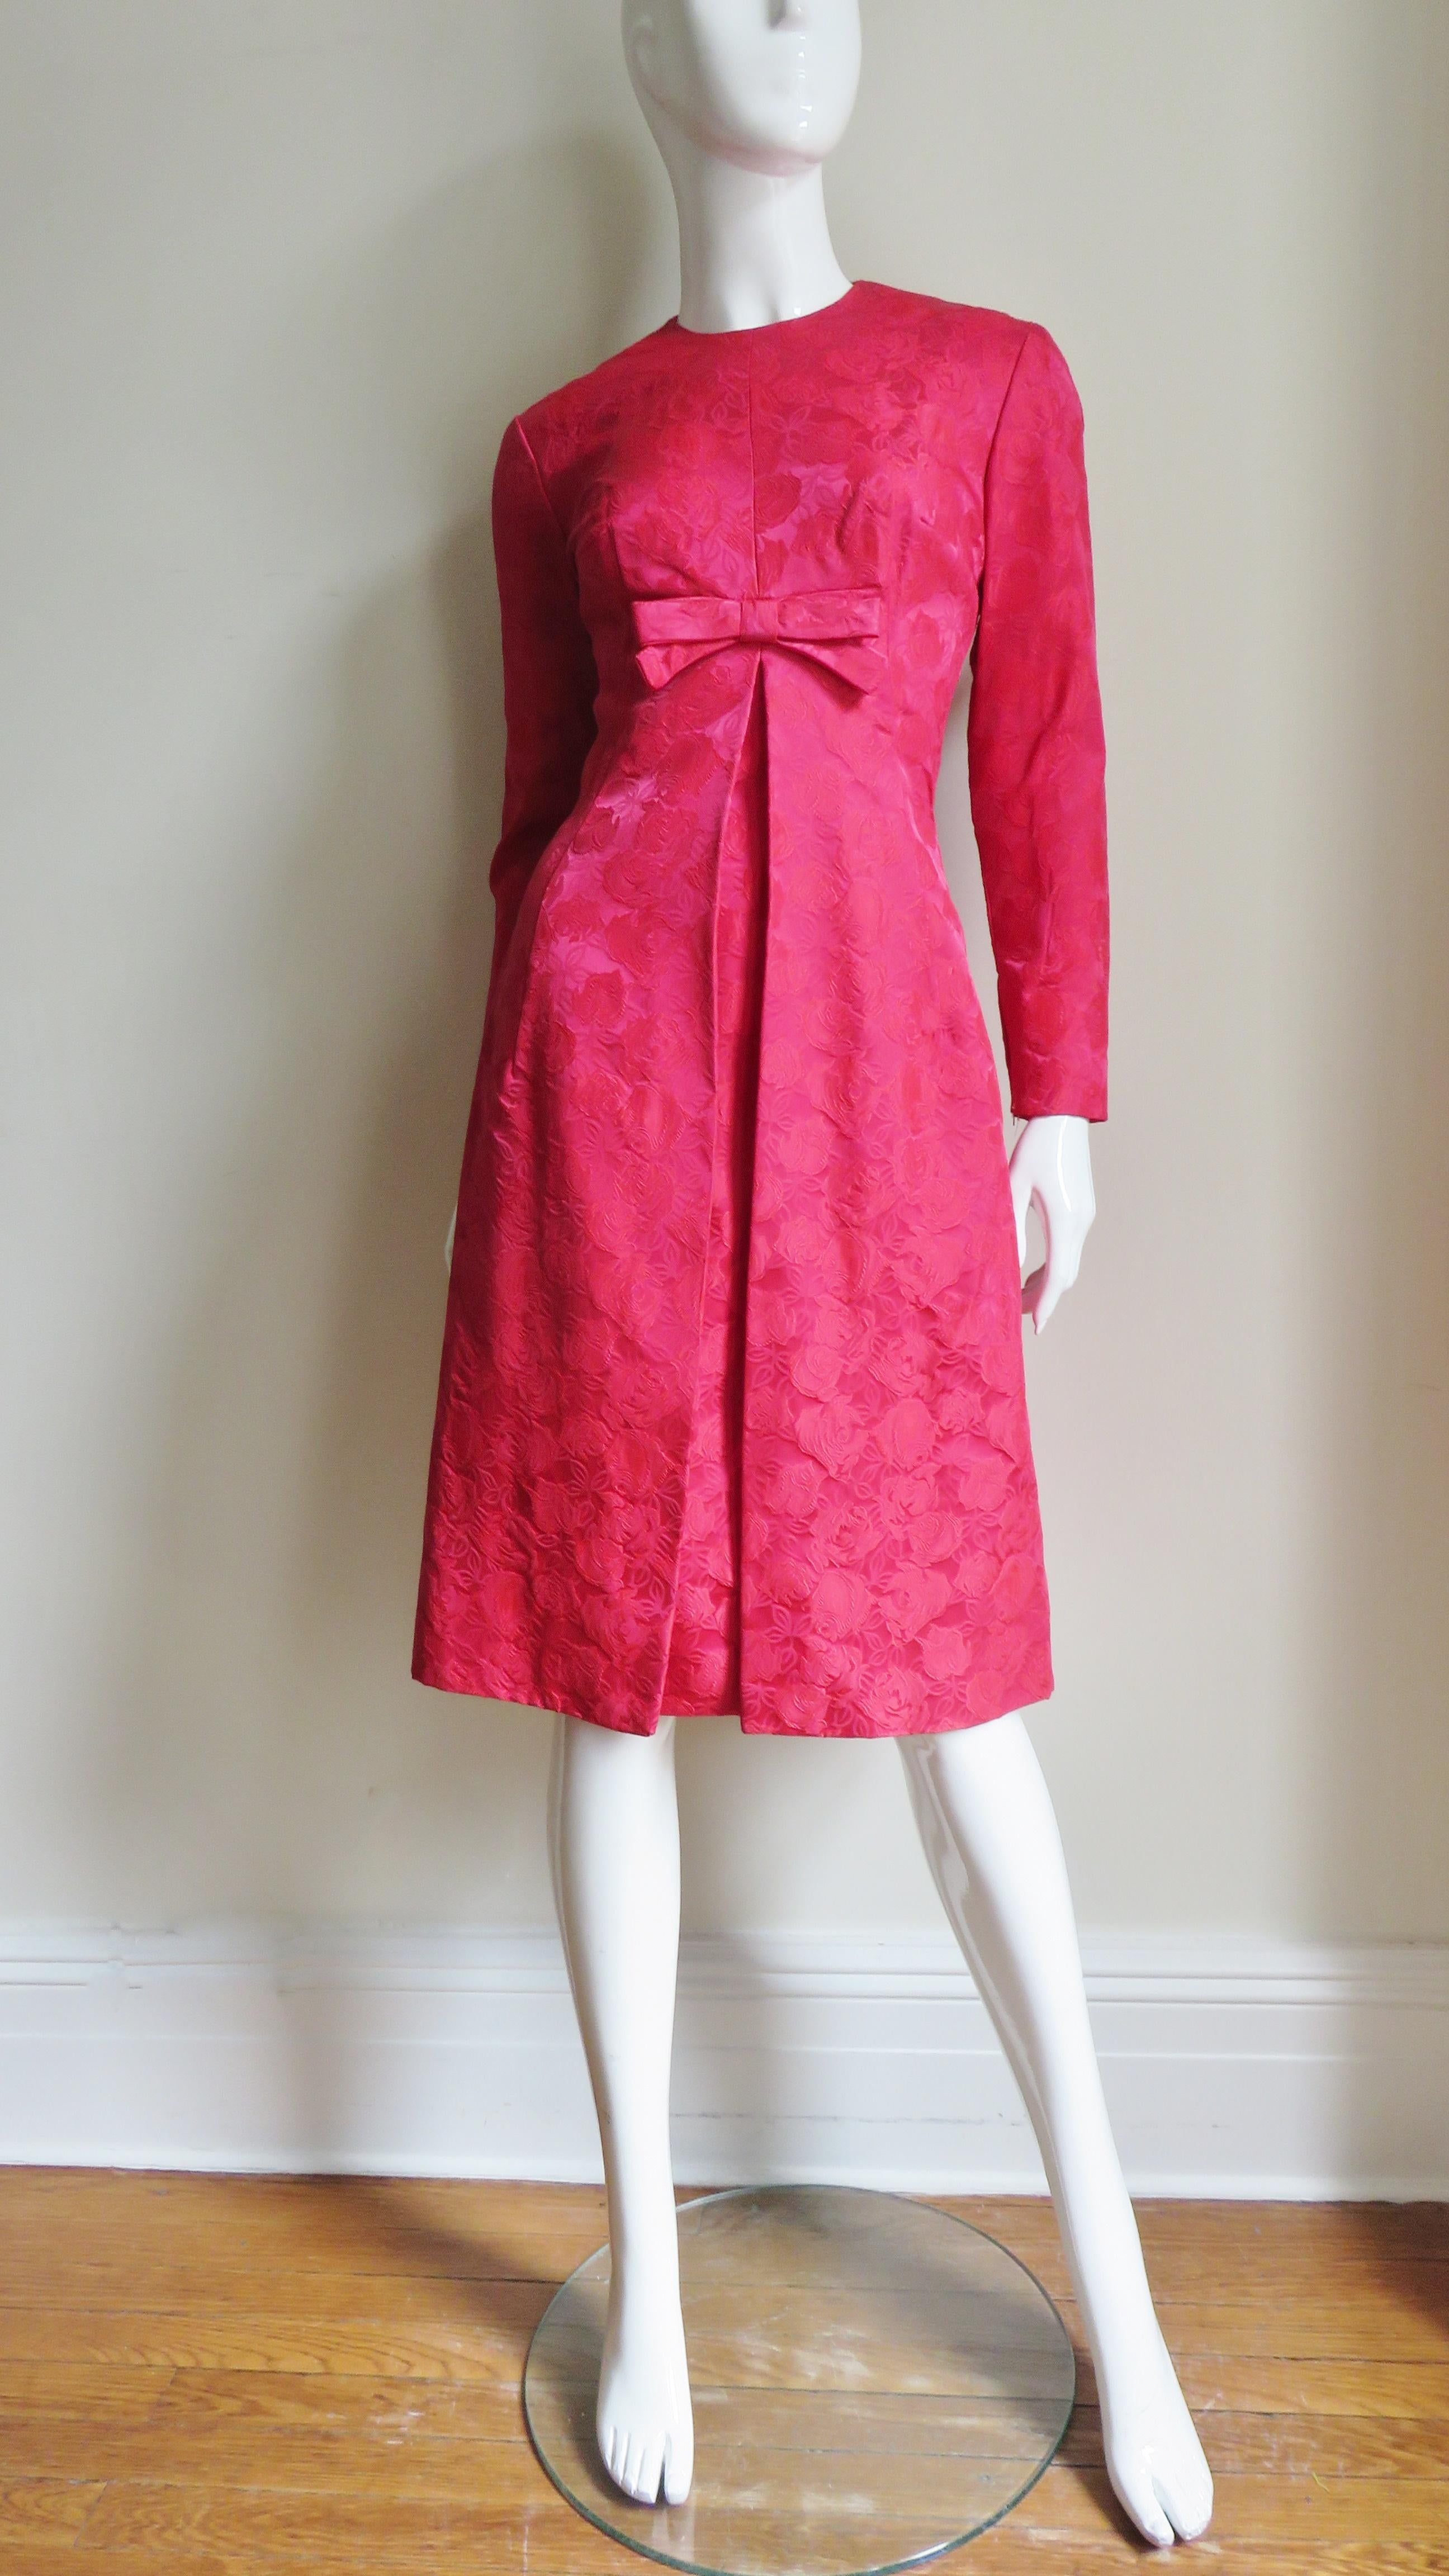 Suzy Perette New Damask Dress and Overdress 1950s 8